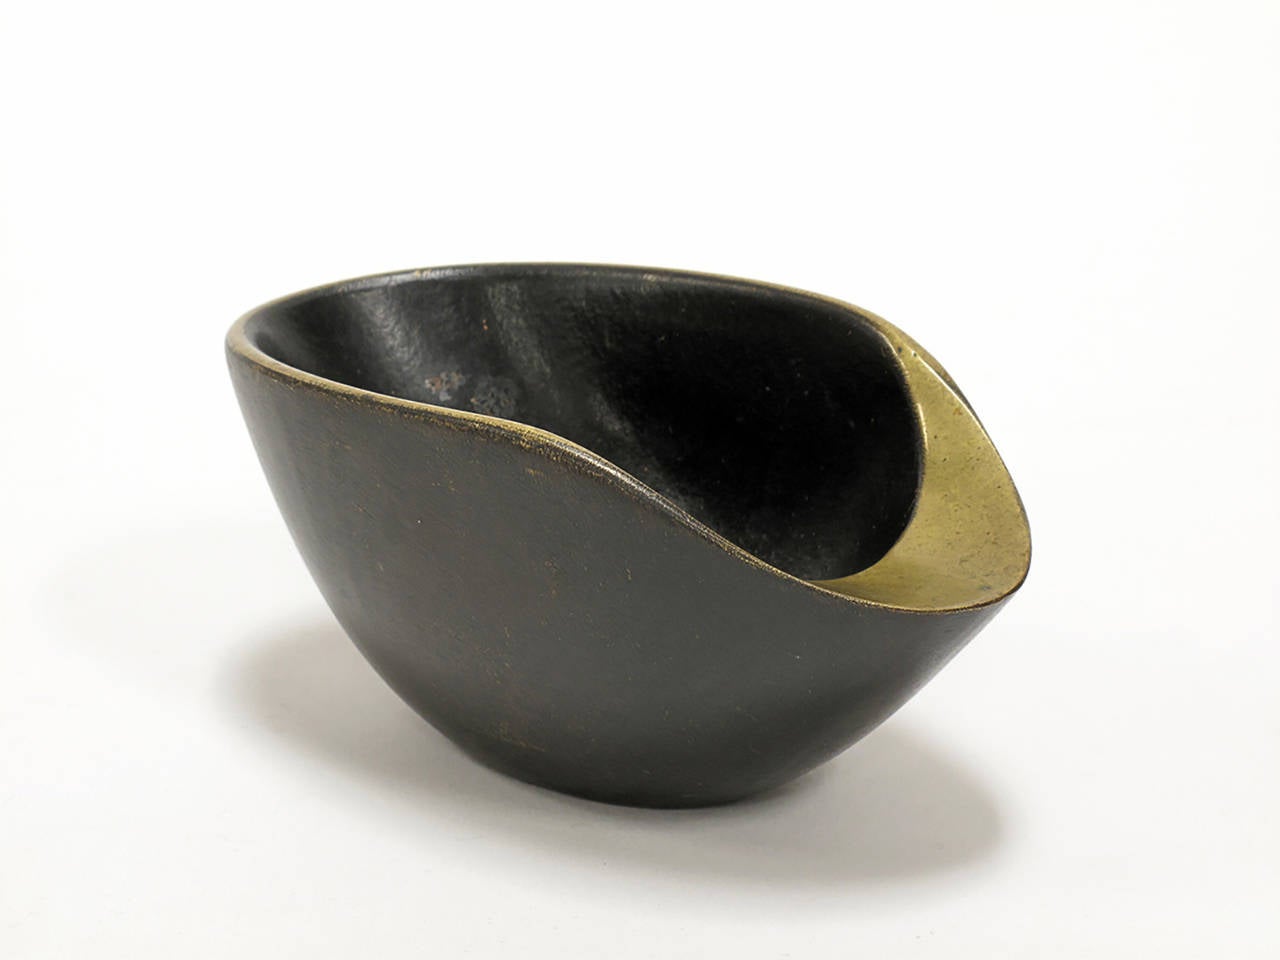 Objet d'art (ashtray or dish) in solid bronze designed and made by Carl Auböck at the Werkstätte Auböck, Austria, 1950s, signed 